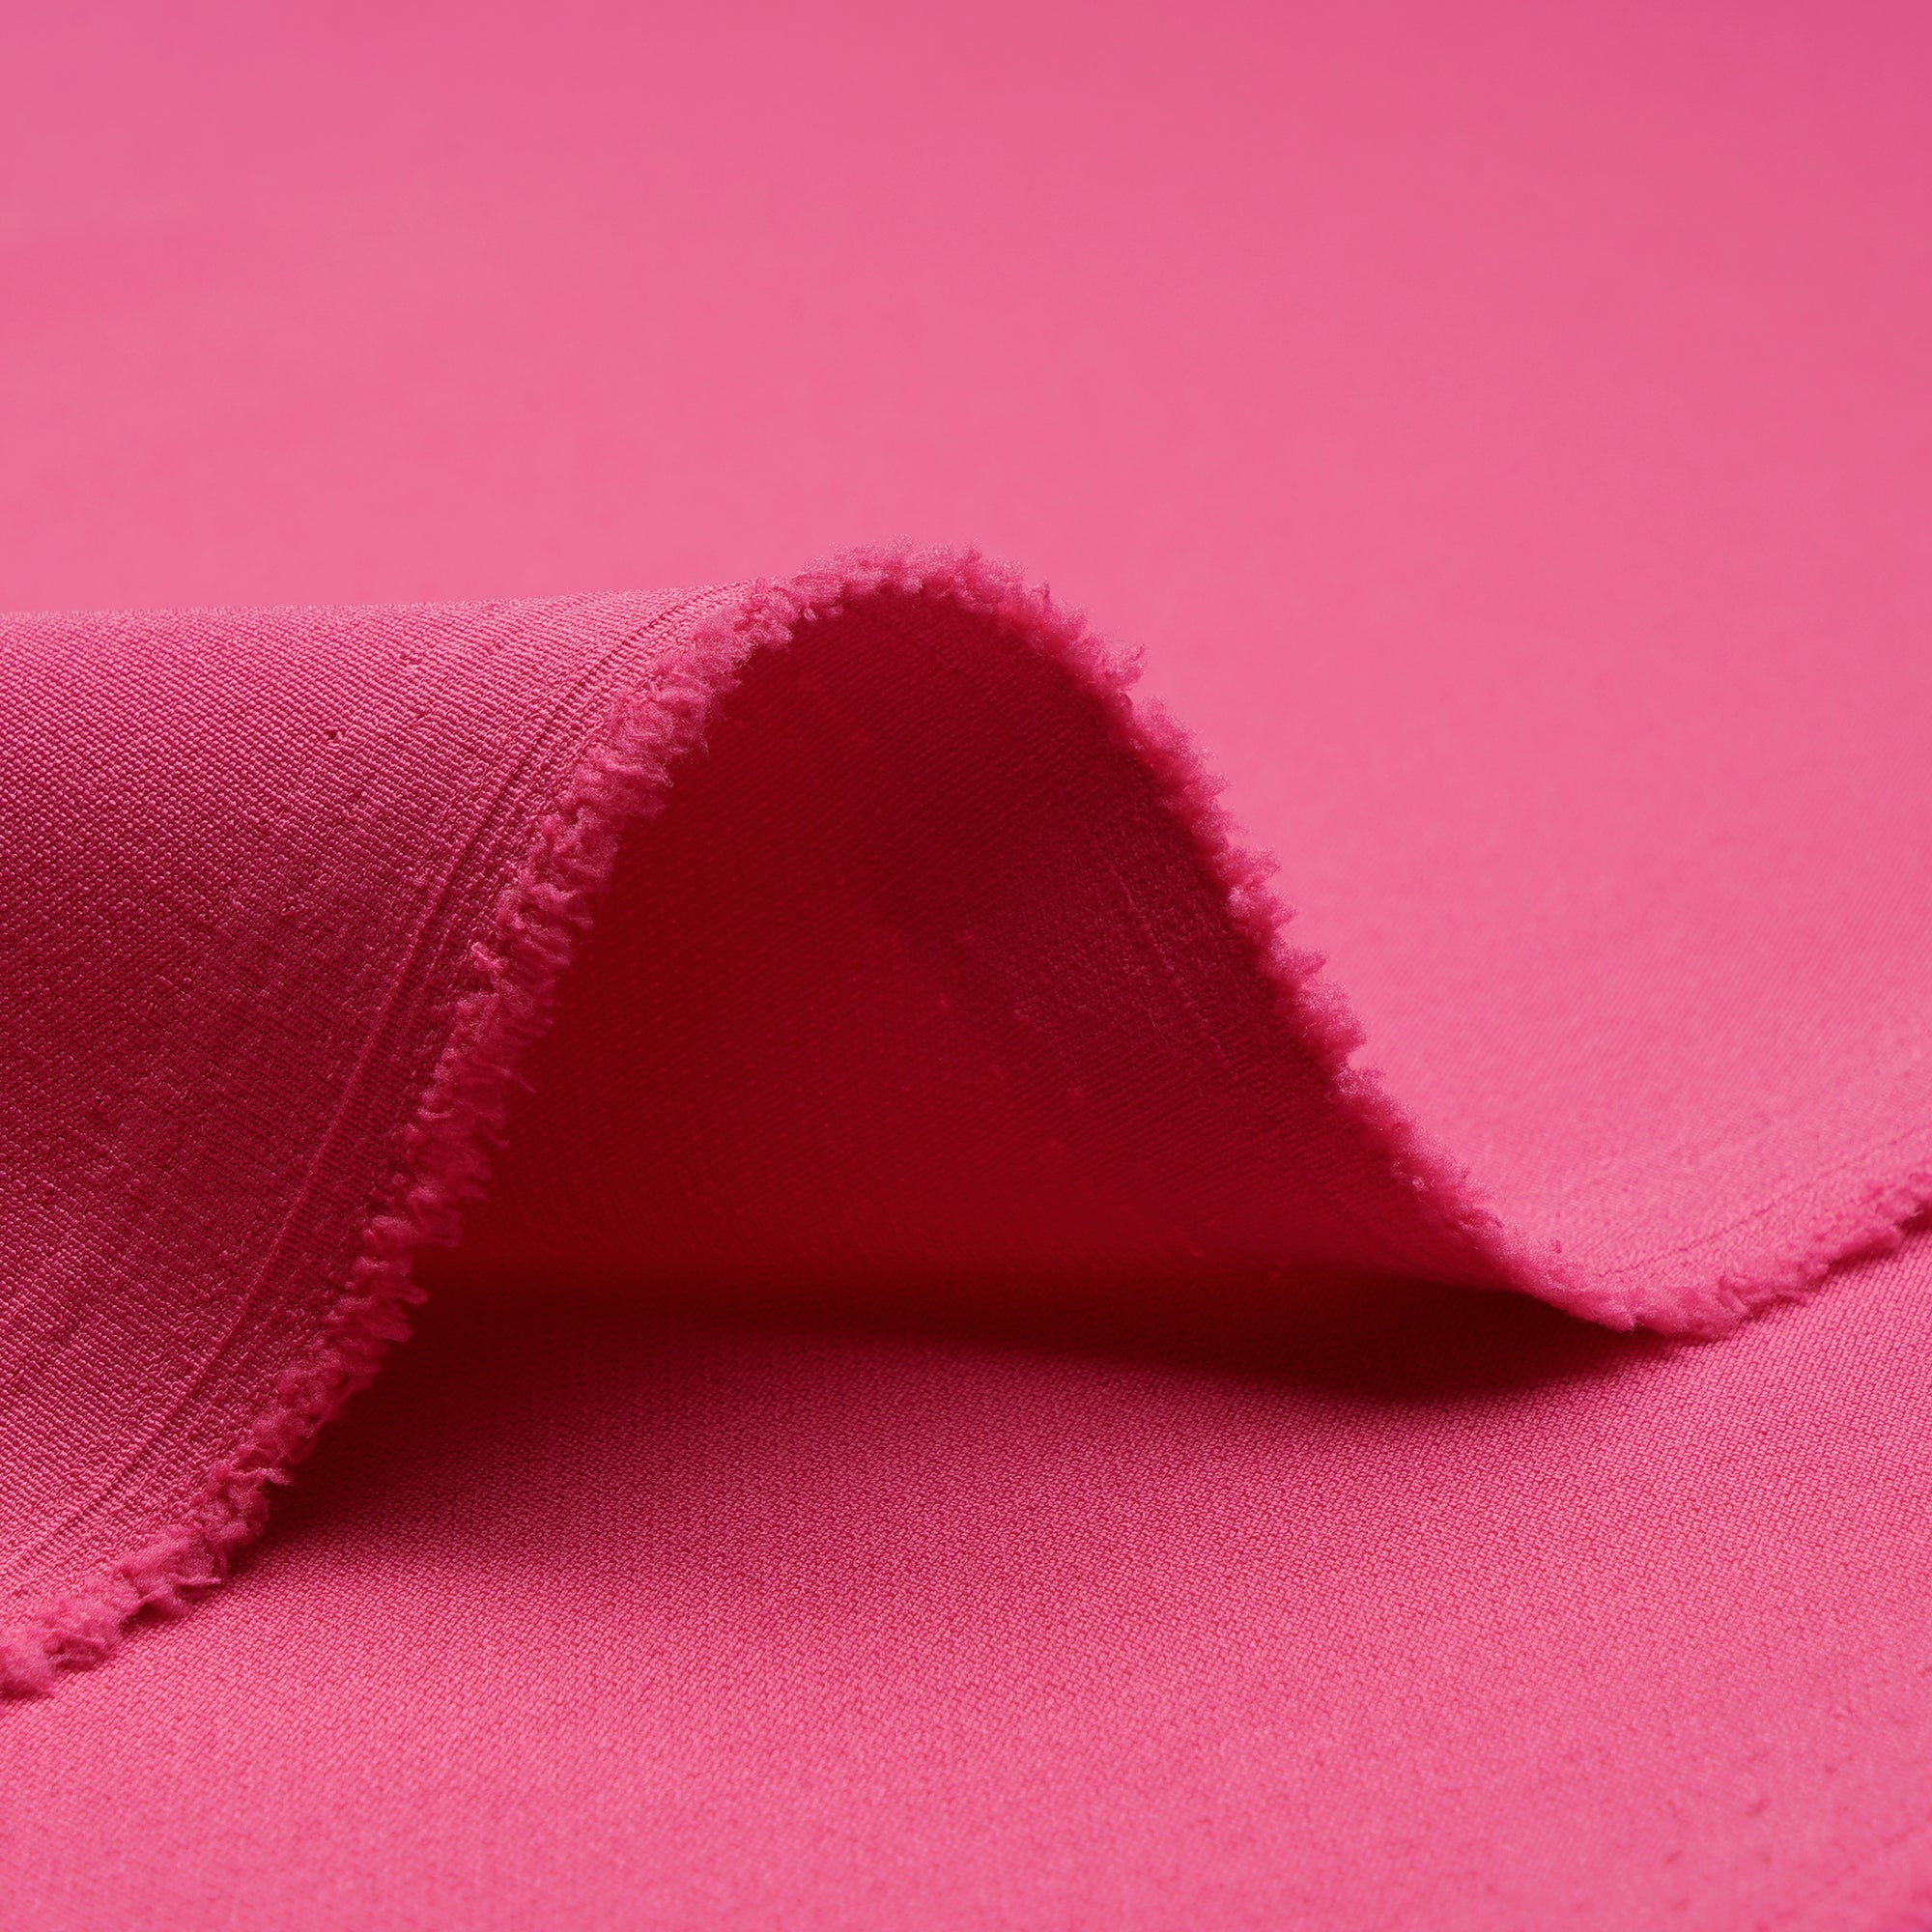 Raspberry Sorbet Solid Dyed Imported Banana Crepe Fabric (60" Width)